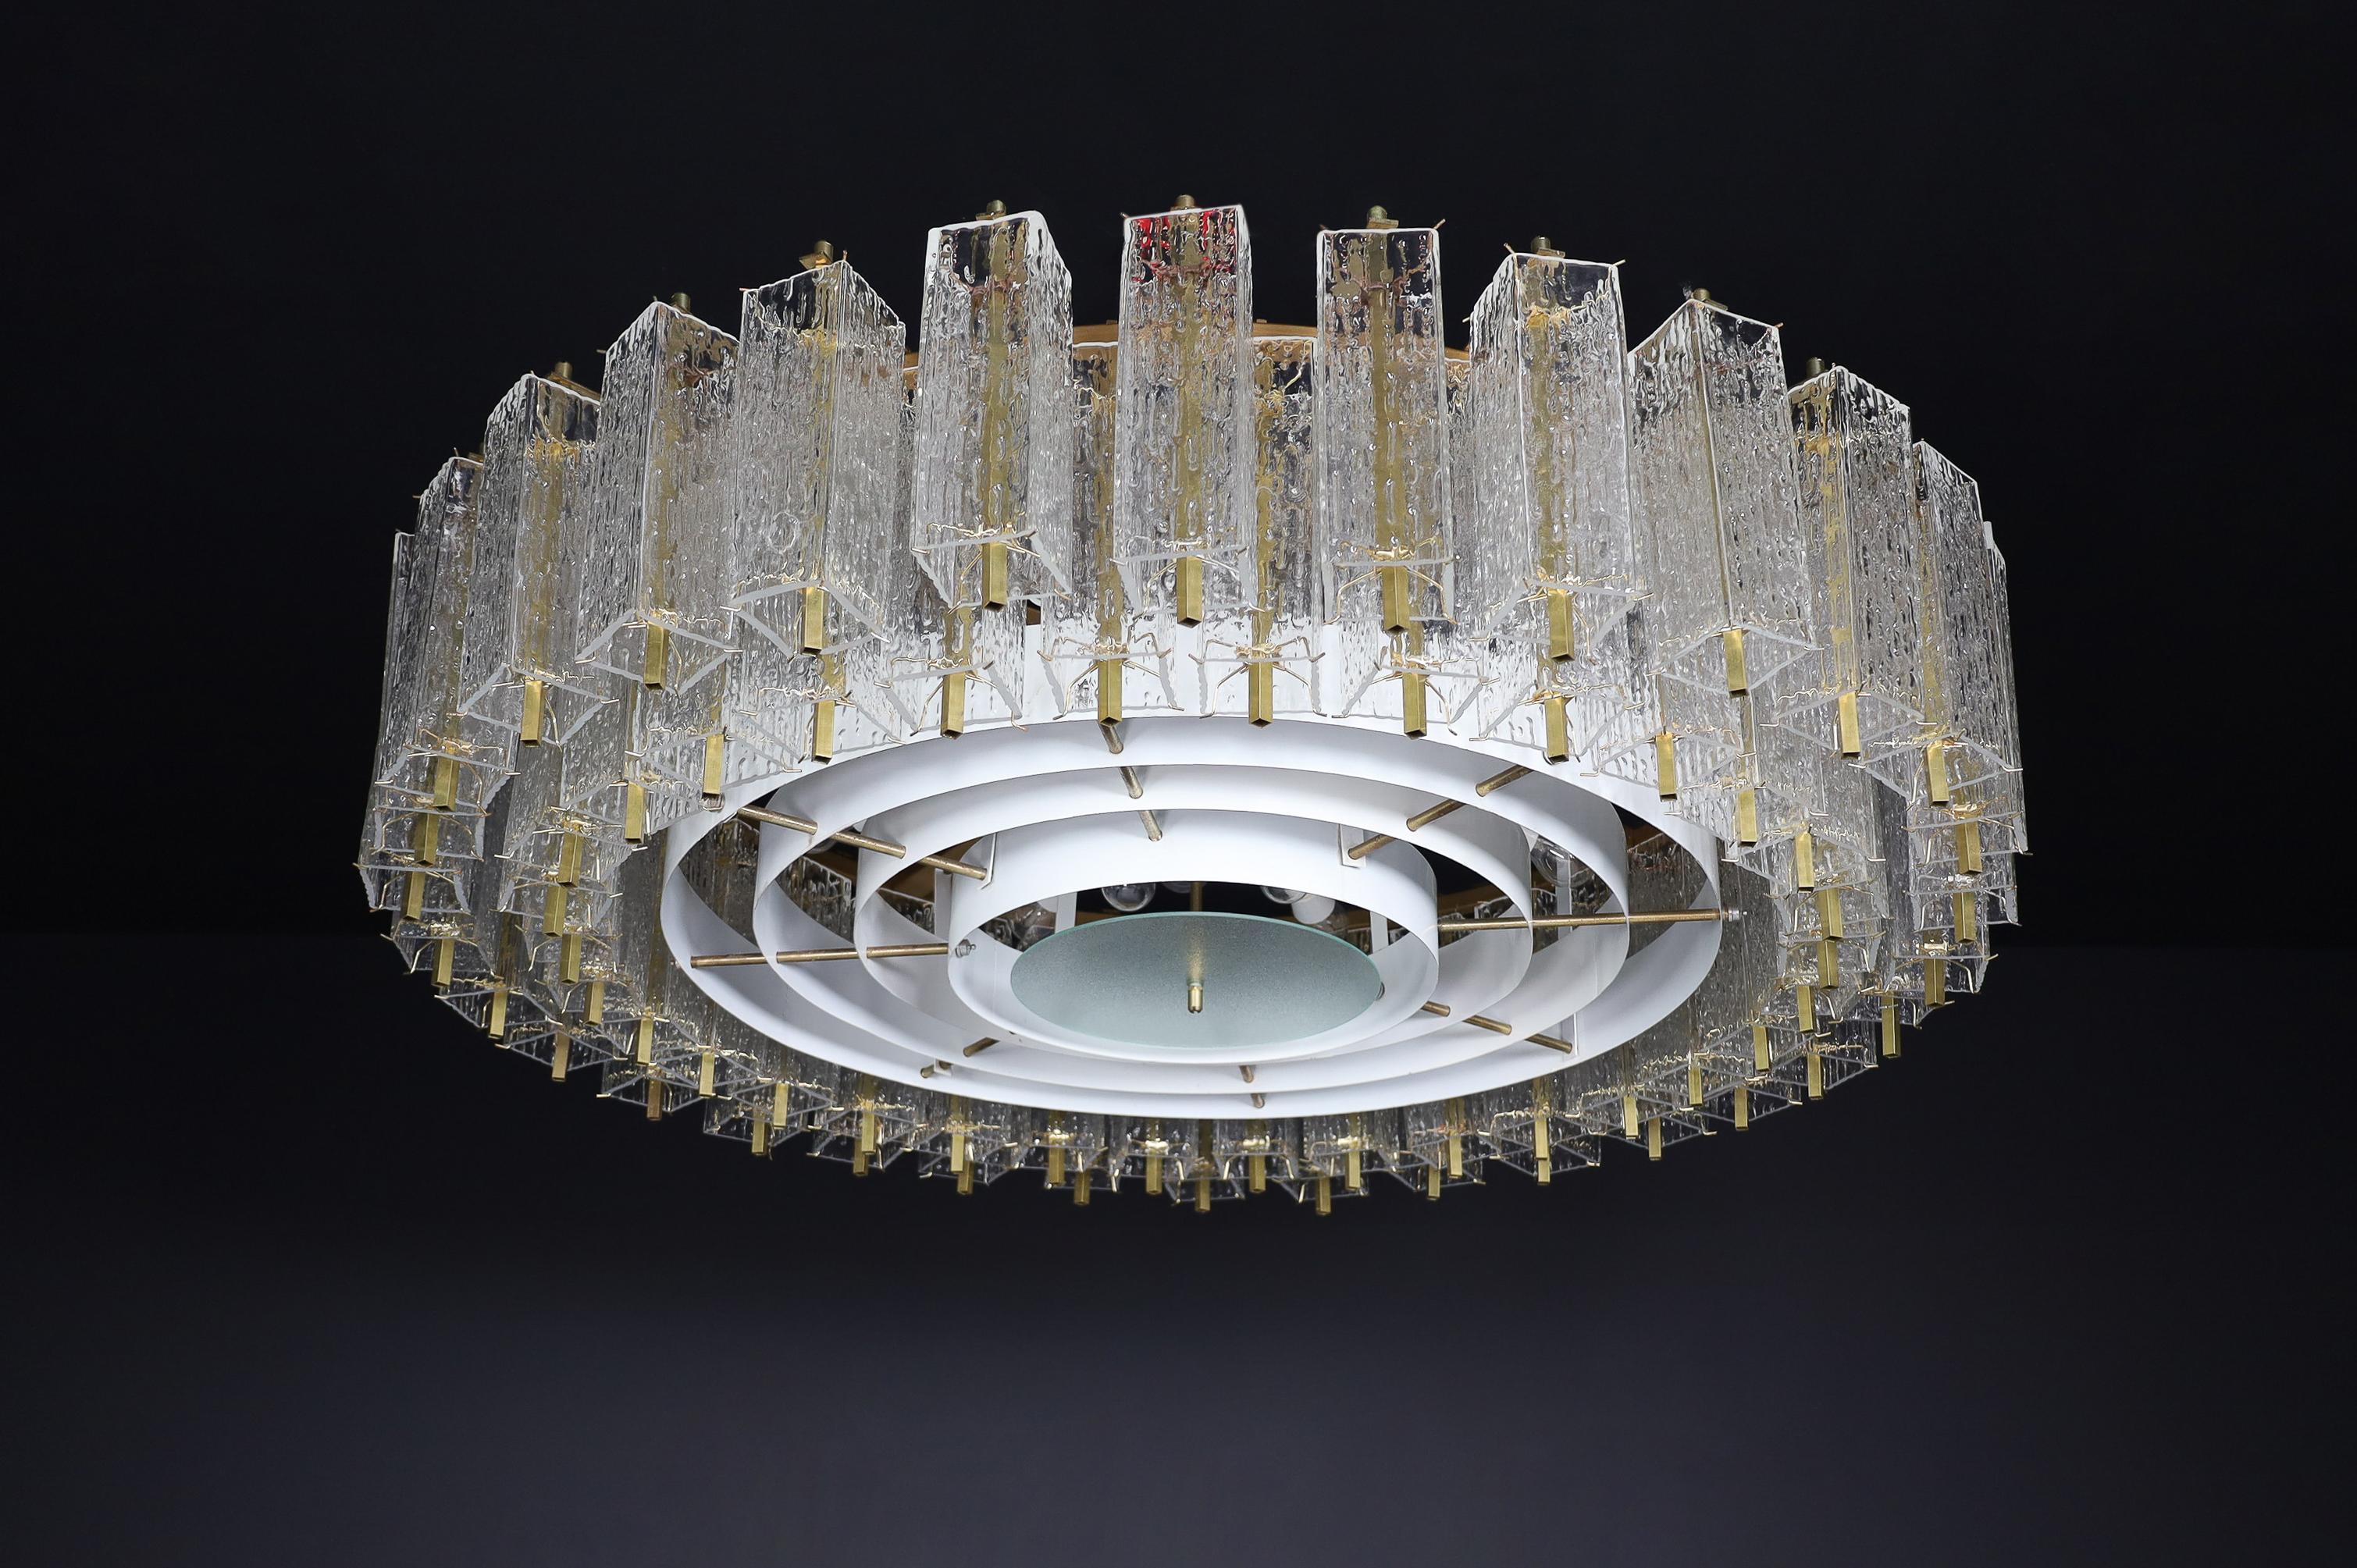 Large Midcentury Chandelier in Structured Glass and Brass, Europe 1960s

These excellent and heavy-quality chandelier was made in Europe and manufactured circa the 1960s. The chandelier has twenty (E27) sockets and holds numerous structured glass